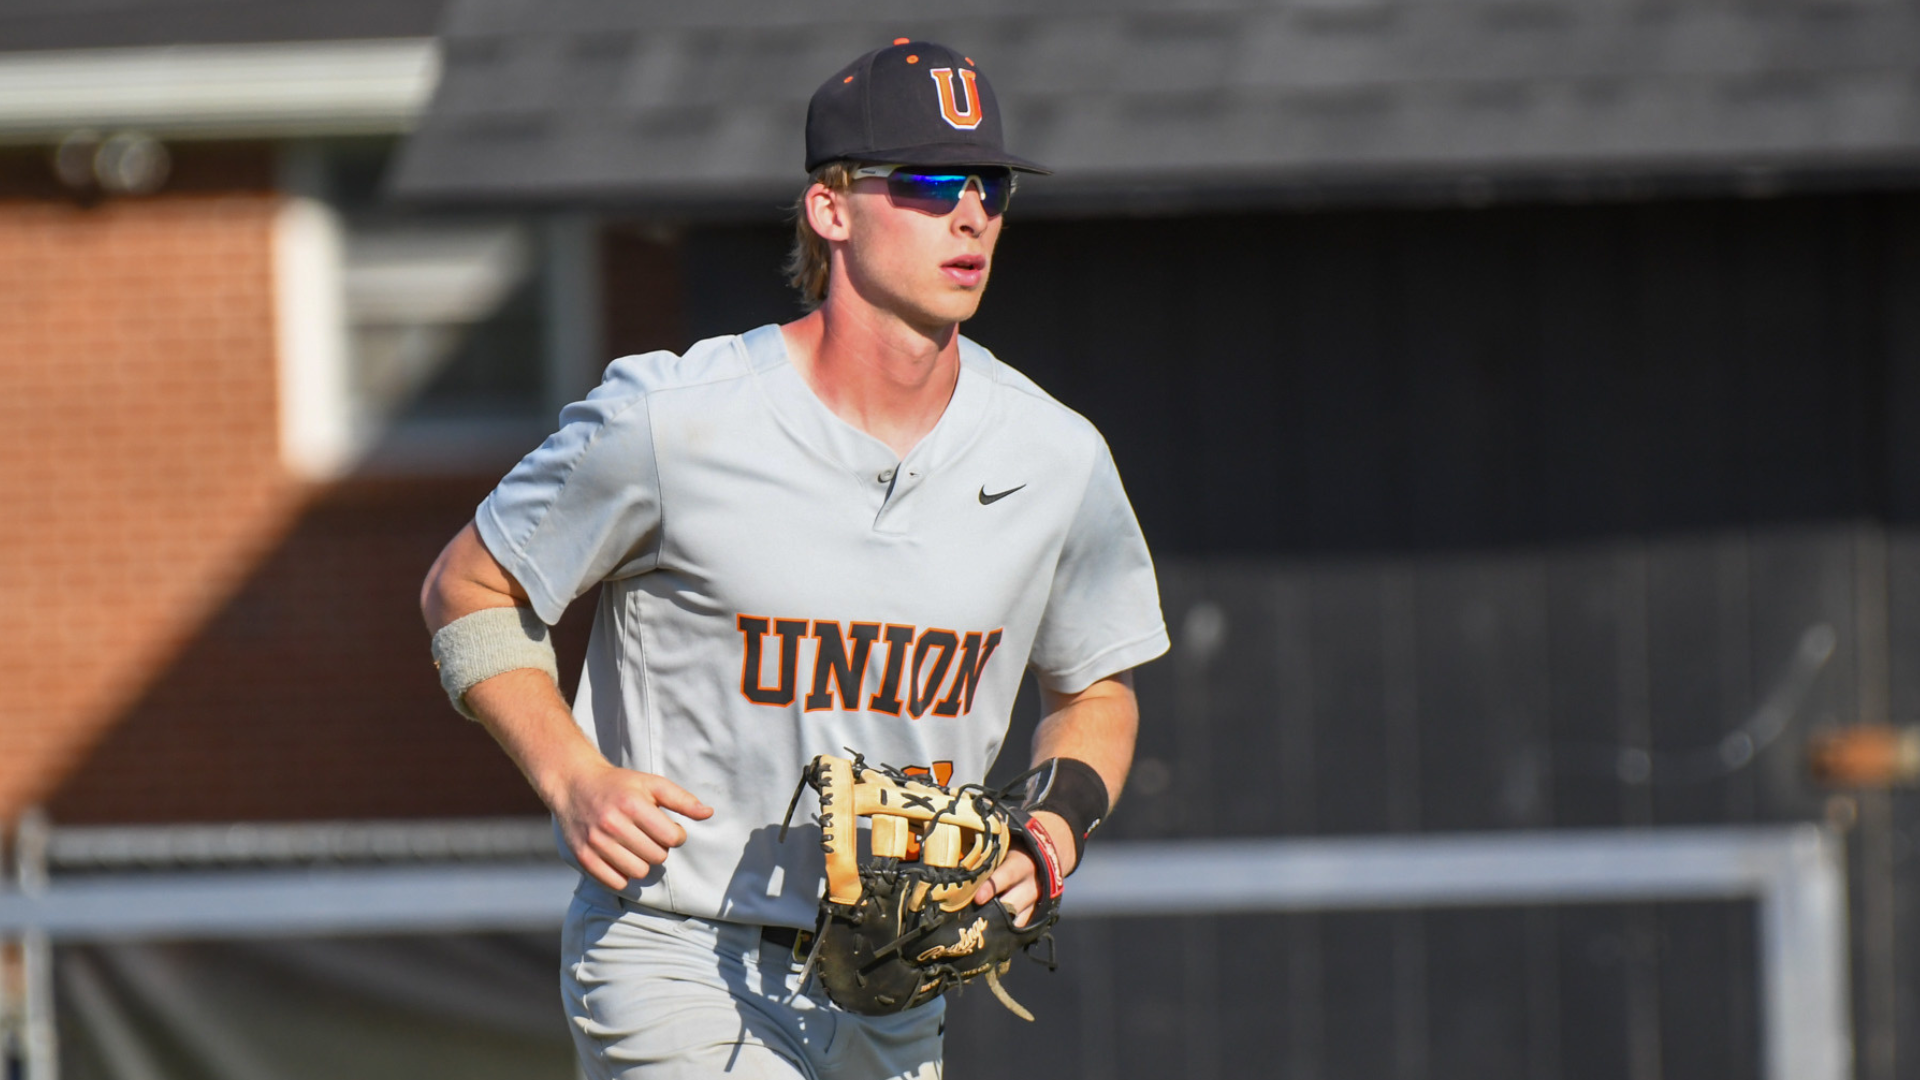 Union falls in first game of conference series against No. 17 Tennessee Wesleyan